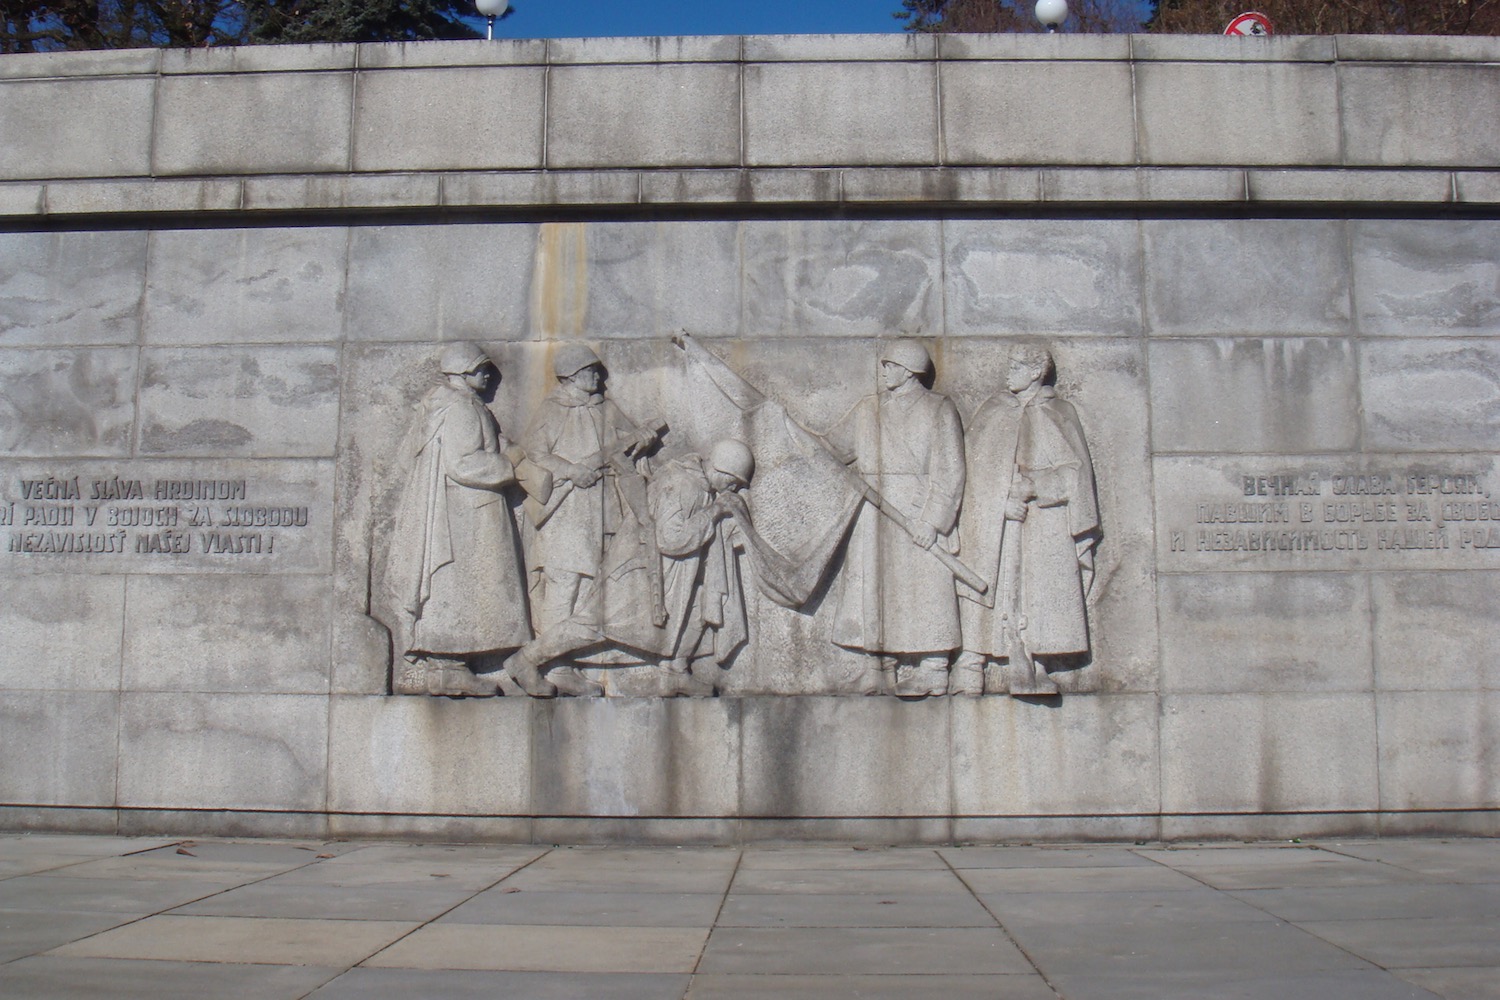 a stone wall with a group of people in robes